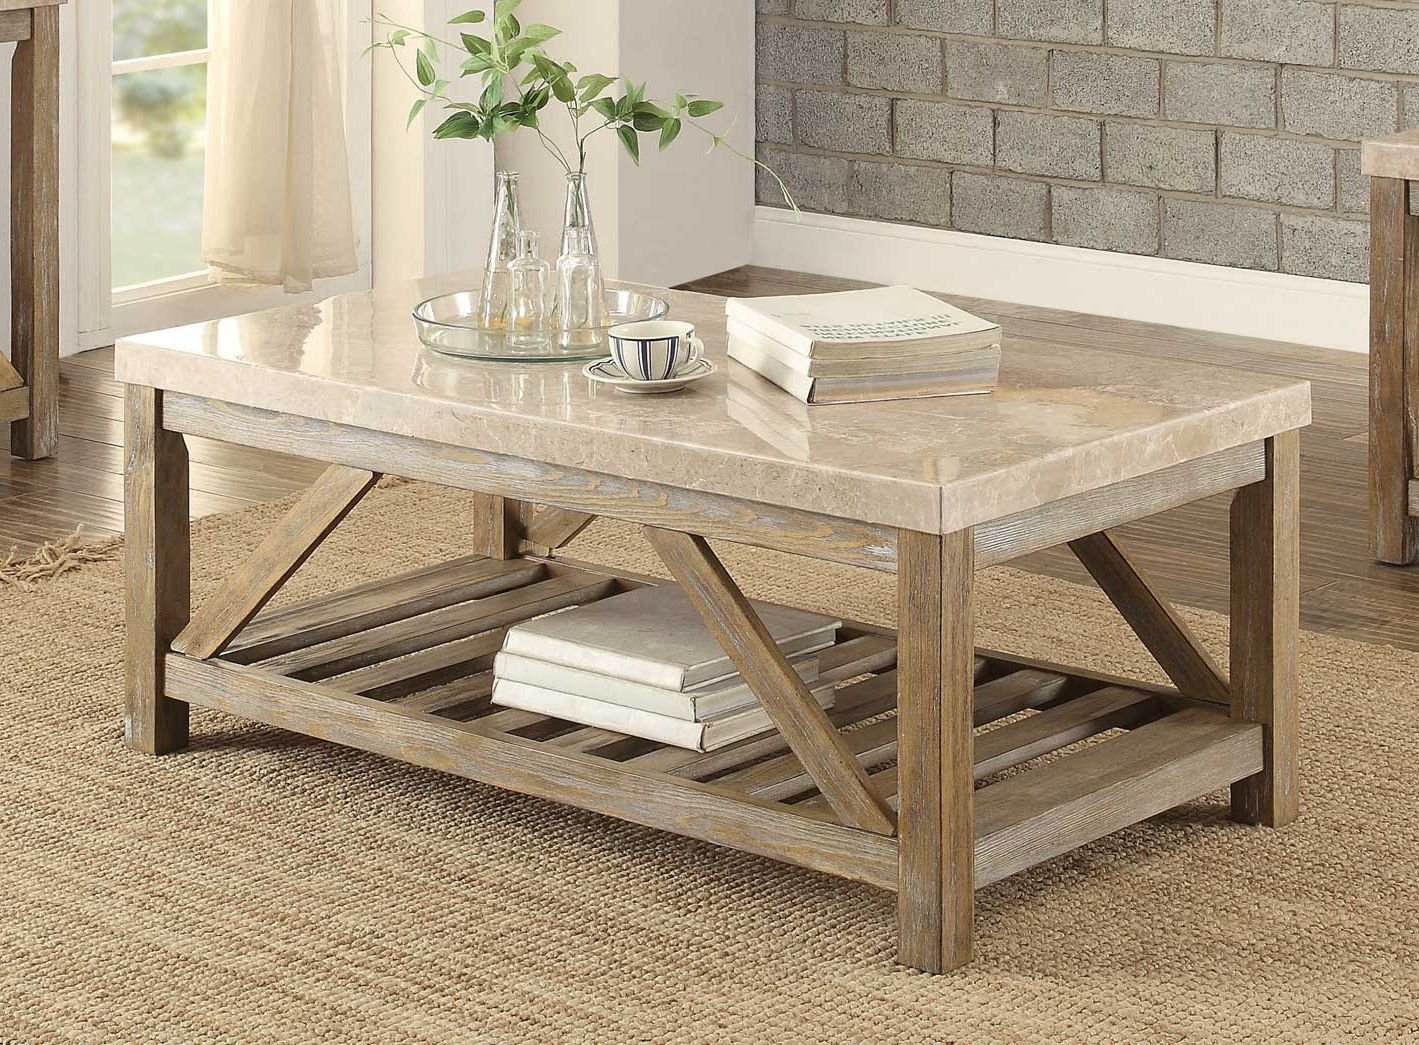 Homelegance Ridley Cocktail/coffee Table Set – Weathered Throughout Newest Square Weathered White Wood Coffee Tables (View 4 of 20)